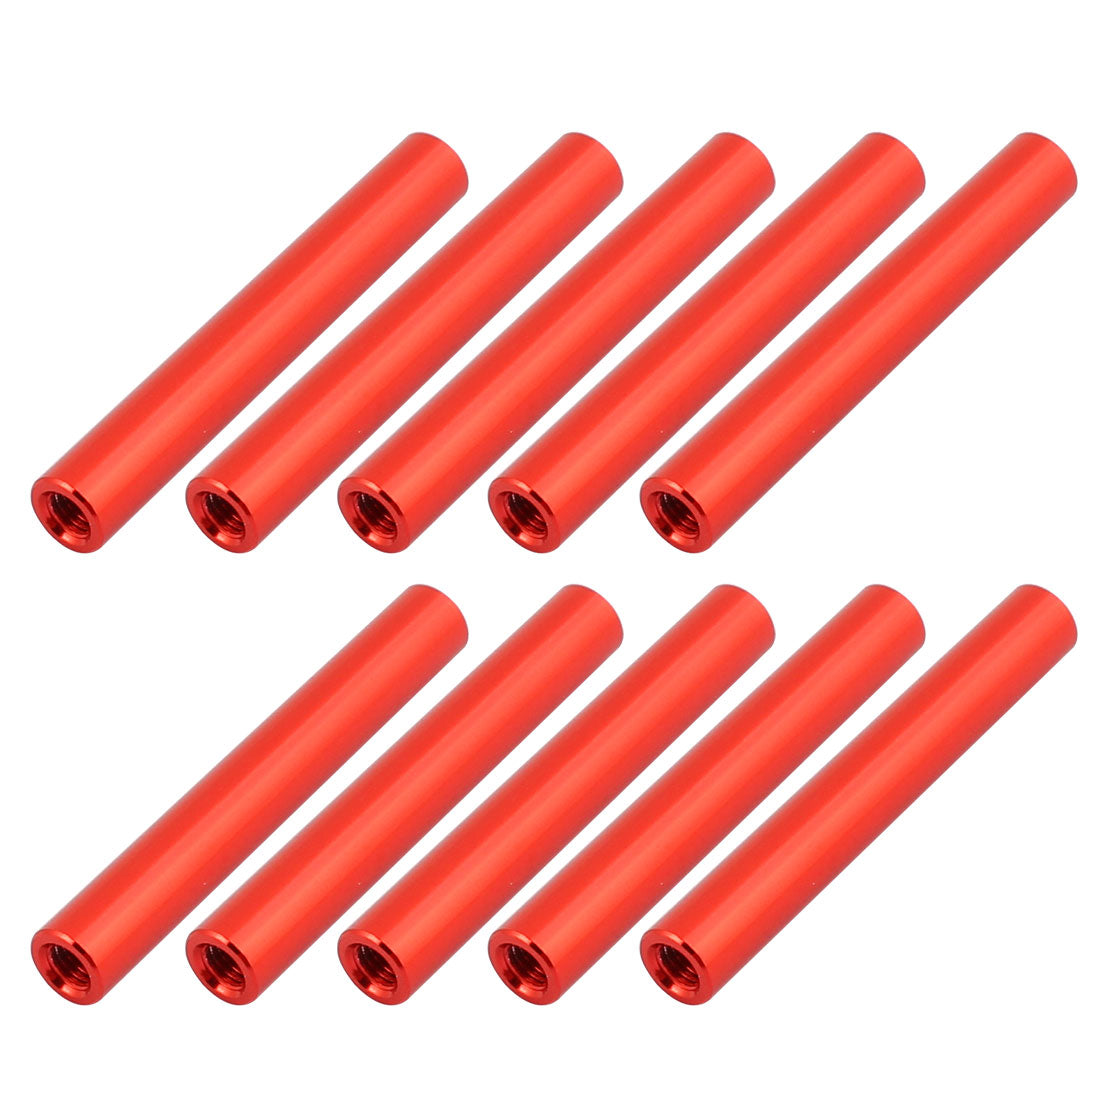 Uxcell Uxcell 10Pcs M3 x 35mm Round Aluminum Column Alloy Standoff Spacer Stud Fastener for Quadcopter Red